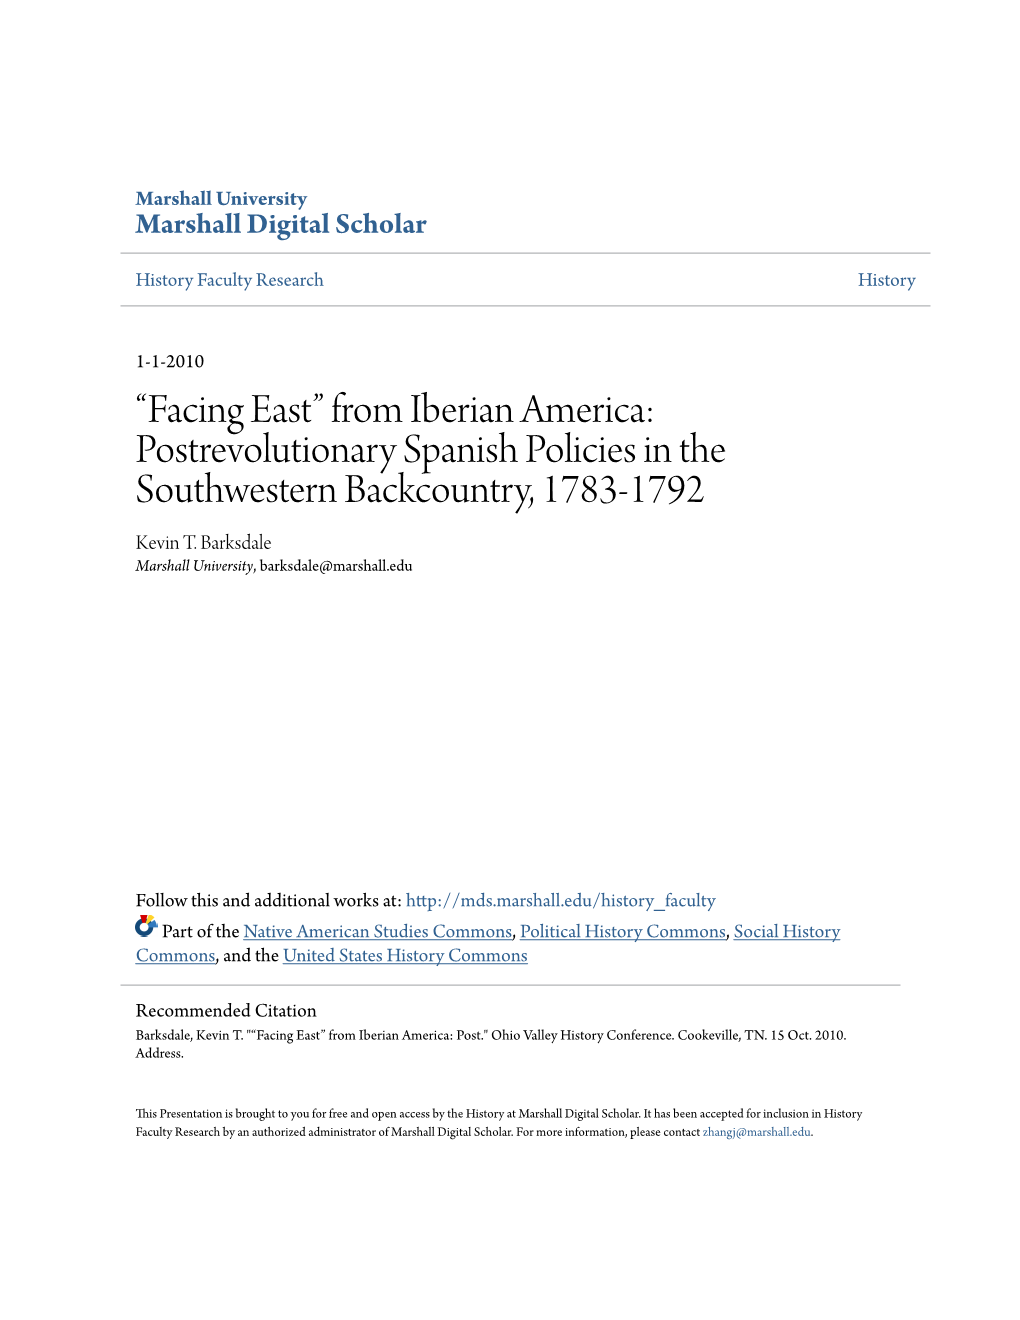 “Facing East” from Iberian America: Postrevolutionary Spanish Policies in the Southwestern Backcountry, 1783-1792 Kevin T